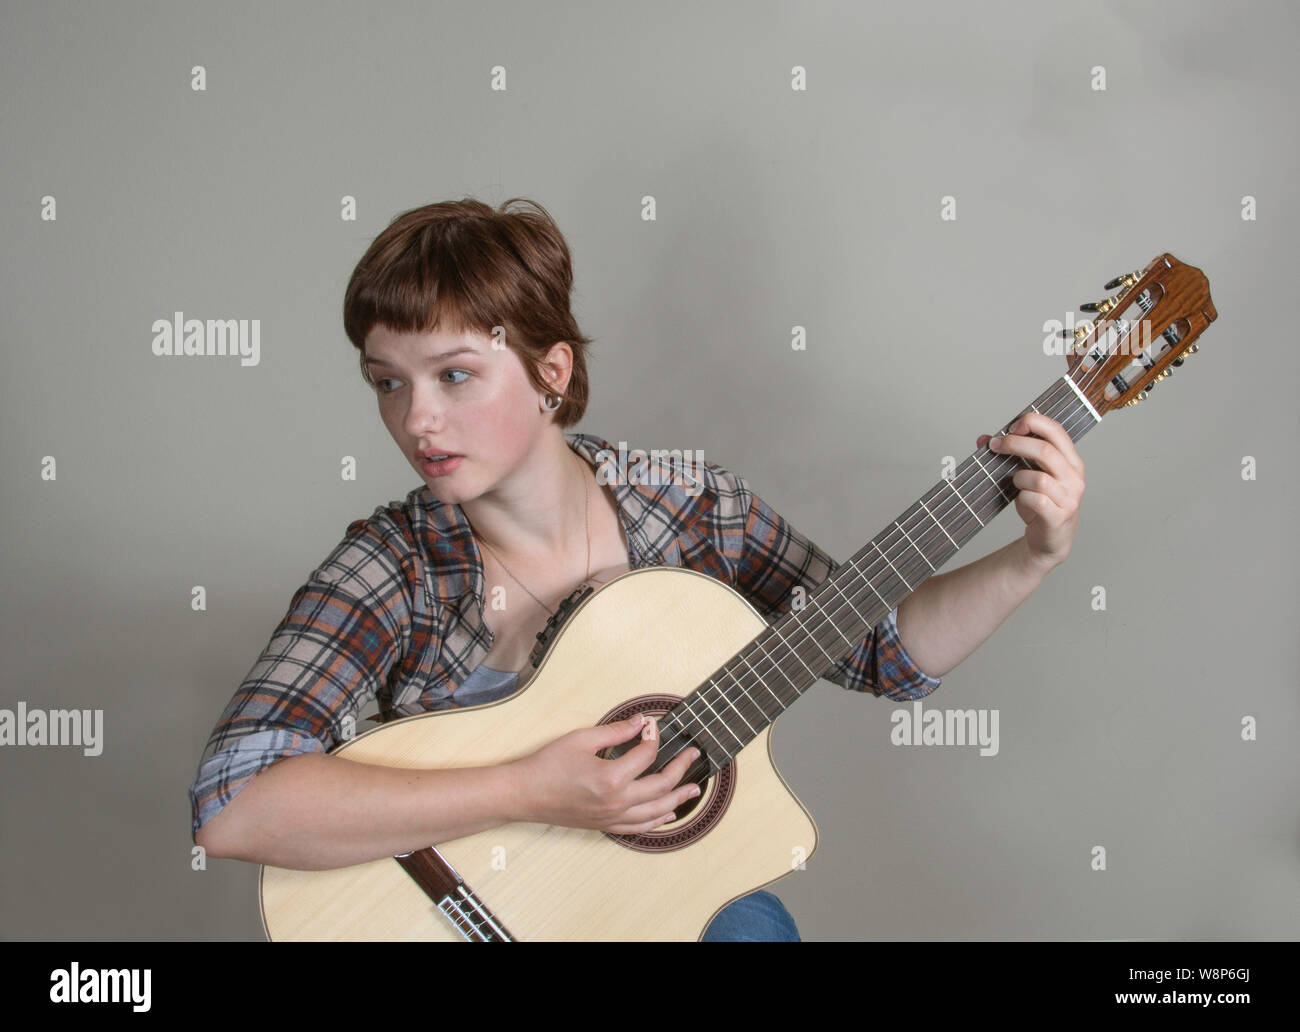 A pretty young woman plays a classical guitar in a horizontal studio shot with a gray background. No brand ID is visible. Stock Photo